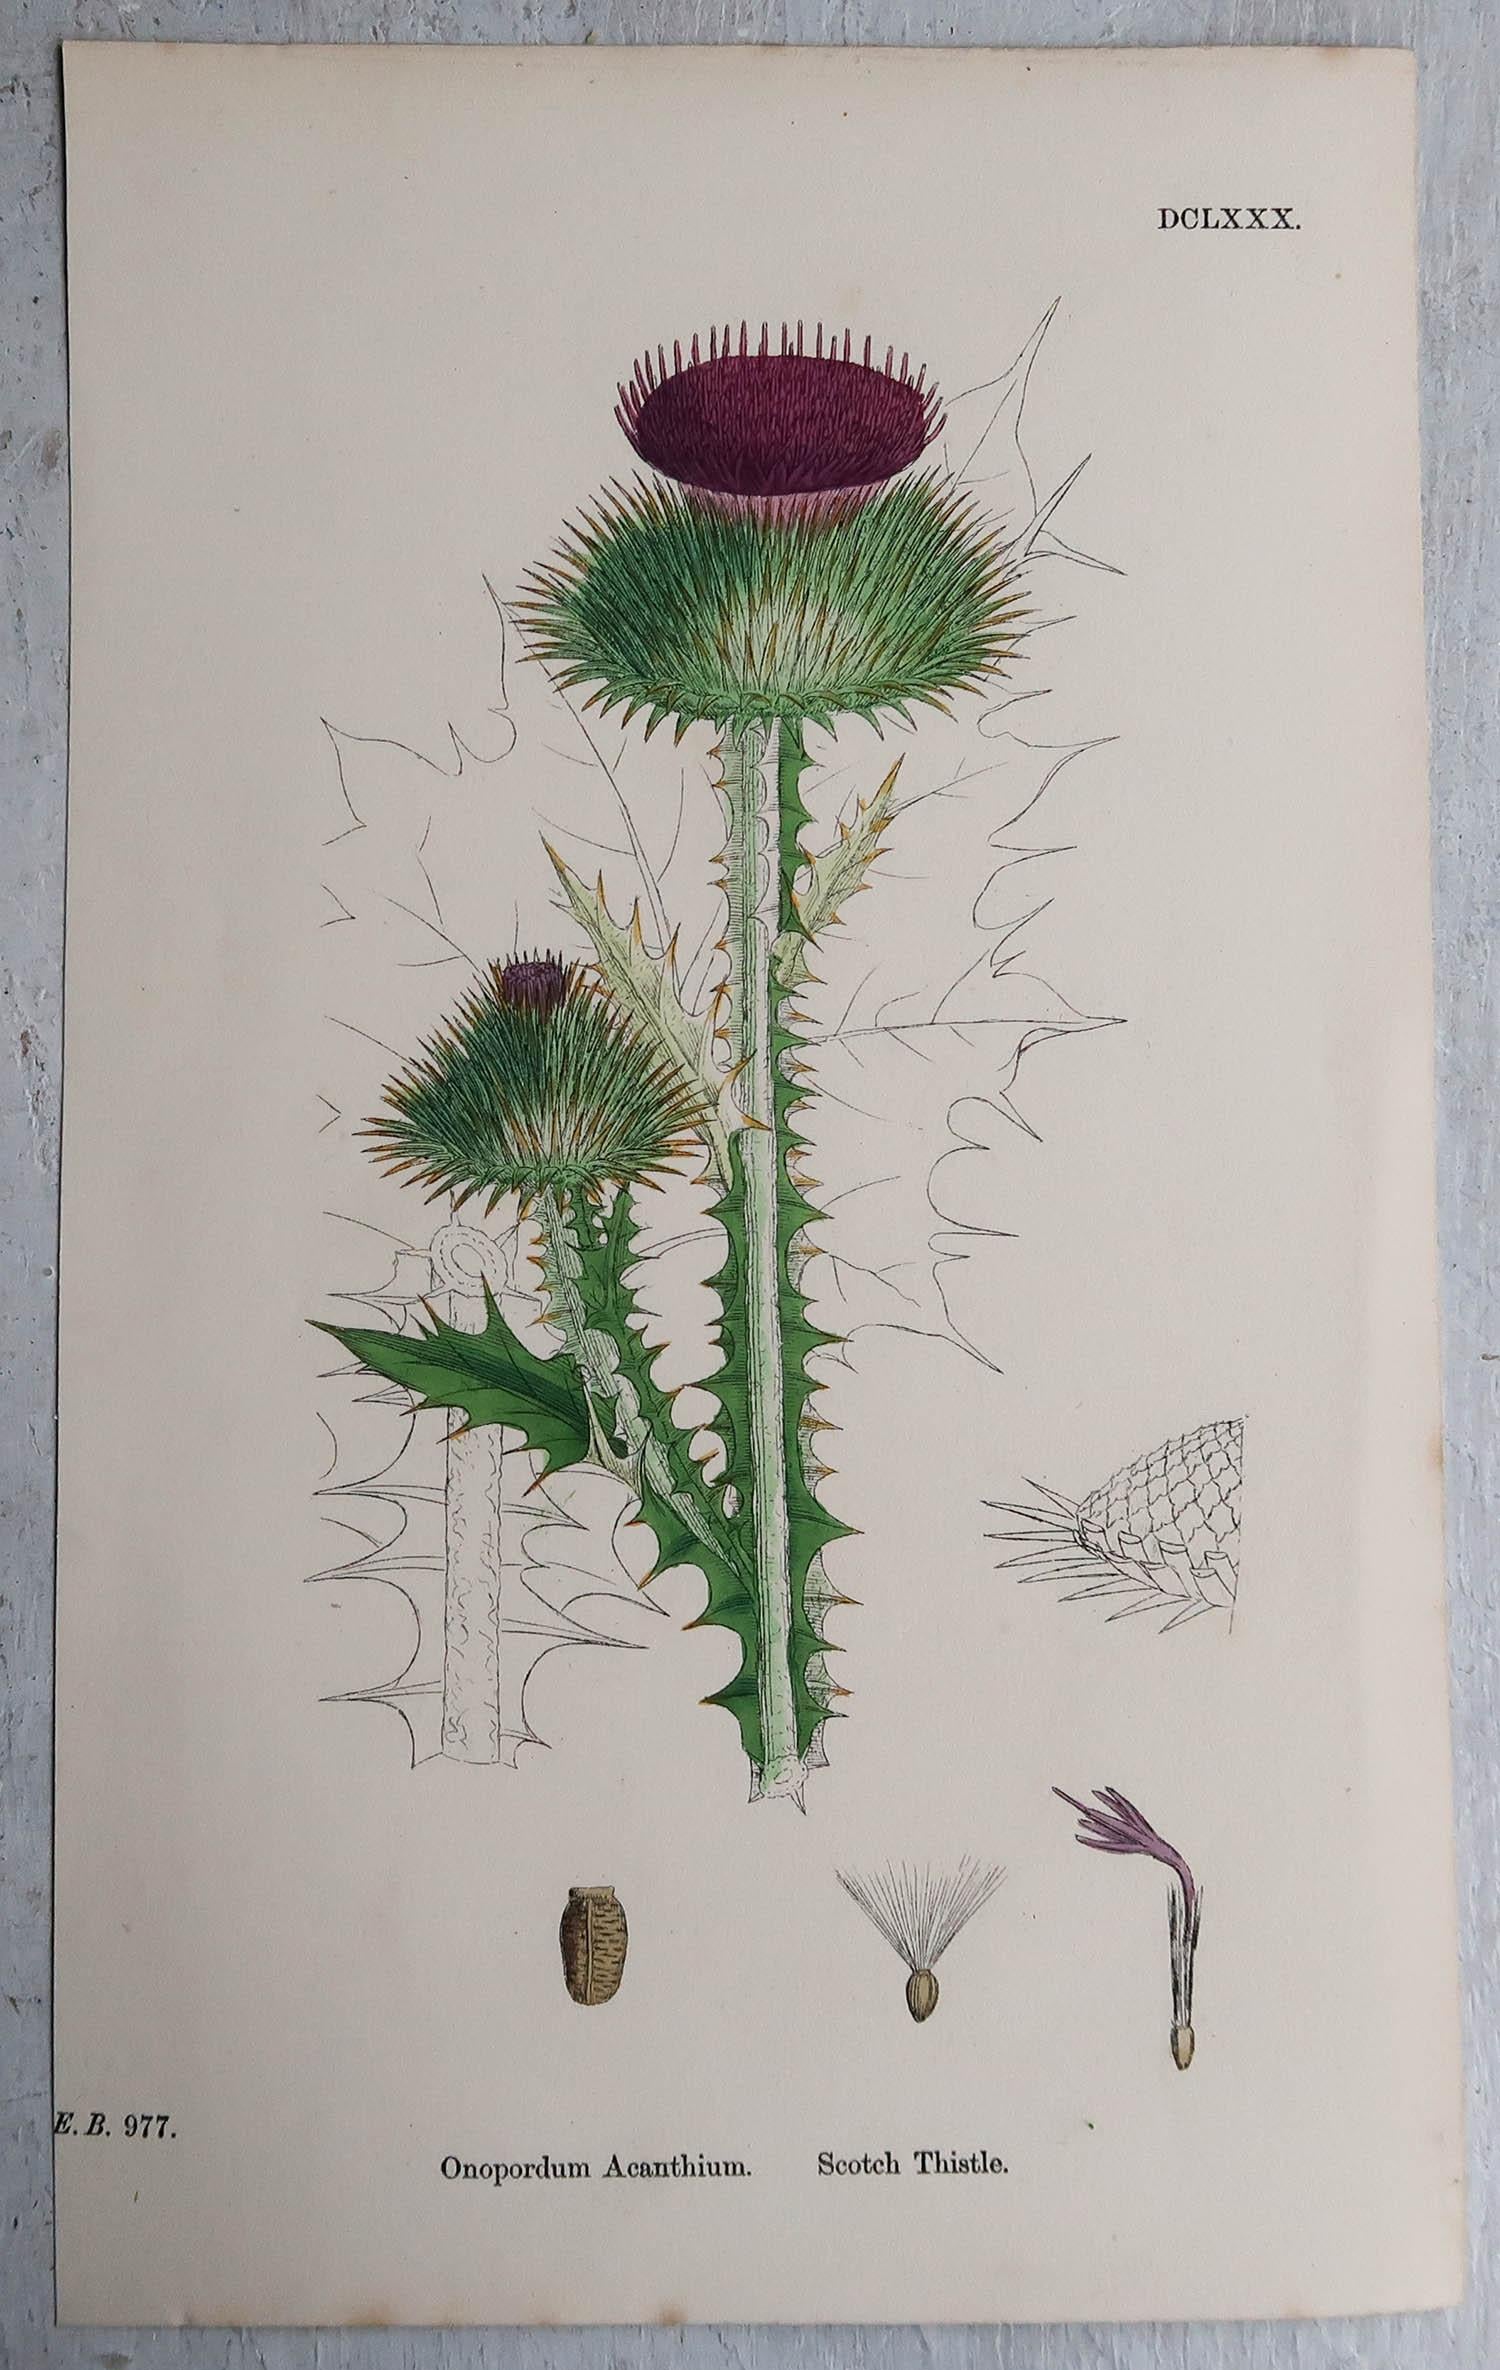 Wonderful set of 16 thistle prints

Lithographs after the original botanical drawings by Hooker.

Original color

Published, circa 1850

Unframed.

The measurement given is for one print.

